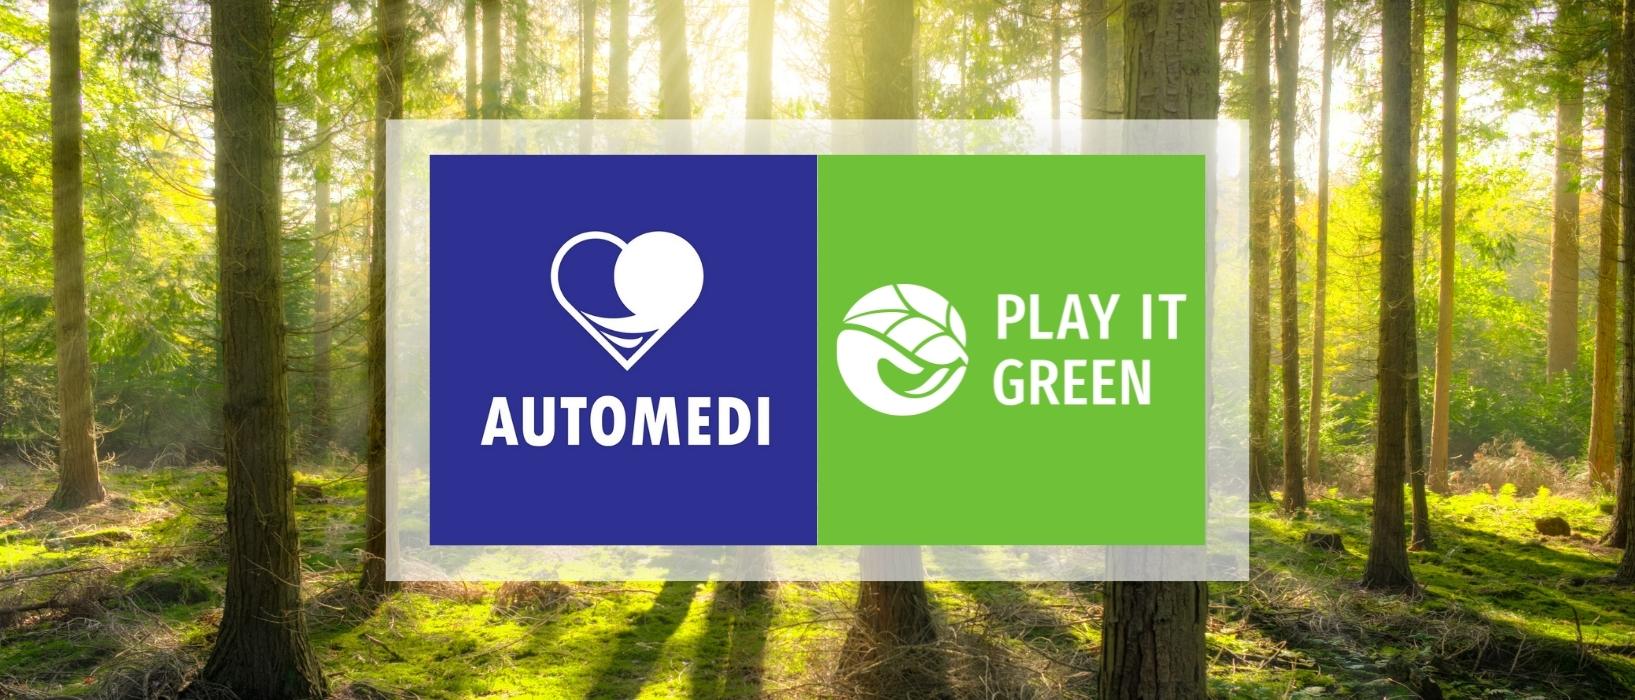 sunlight shining through trees in forest, image of automedi and play it green logos next to each other in front